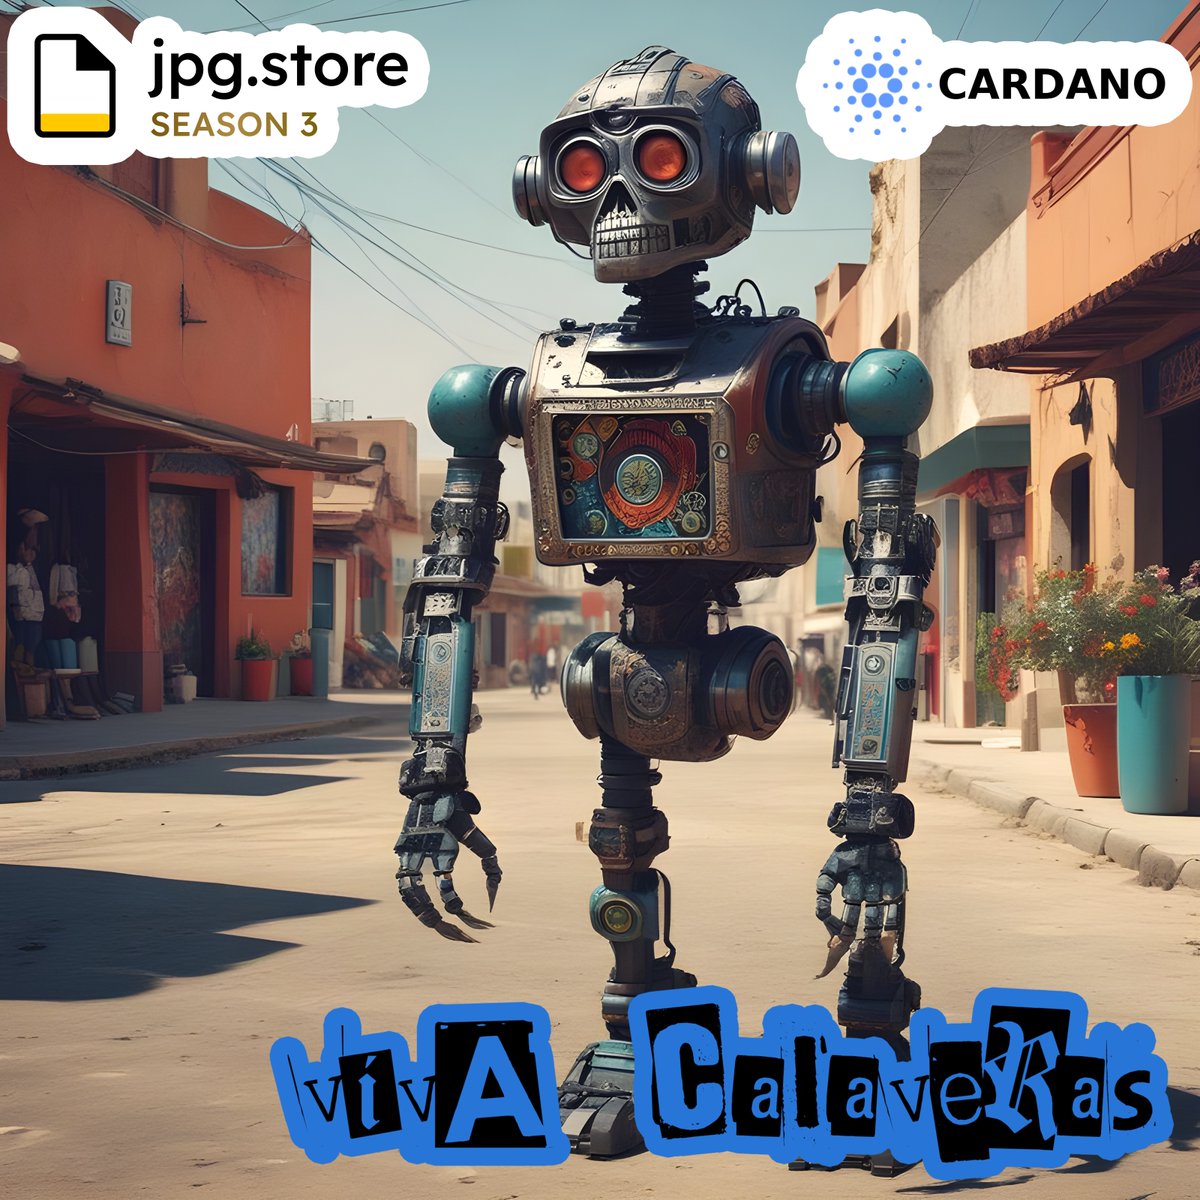 Viva Calaveras on Cardano via jpg.store ! These NFTs can be redeemed for a signed 3D printed K-SCOPES® Trading Card.

Ash
jpg.store/listing/226770…

#cardano #ADA #CardanoNFT #NFT #vivacalaveras #calaveras #kscopes #tradingcards #3dprinting #AI #AImusic